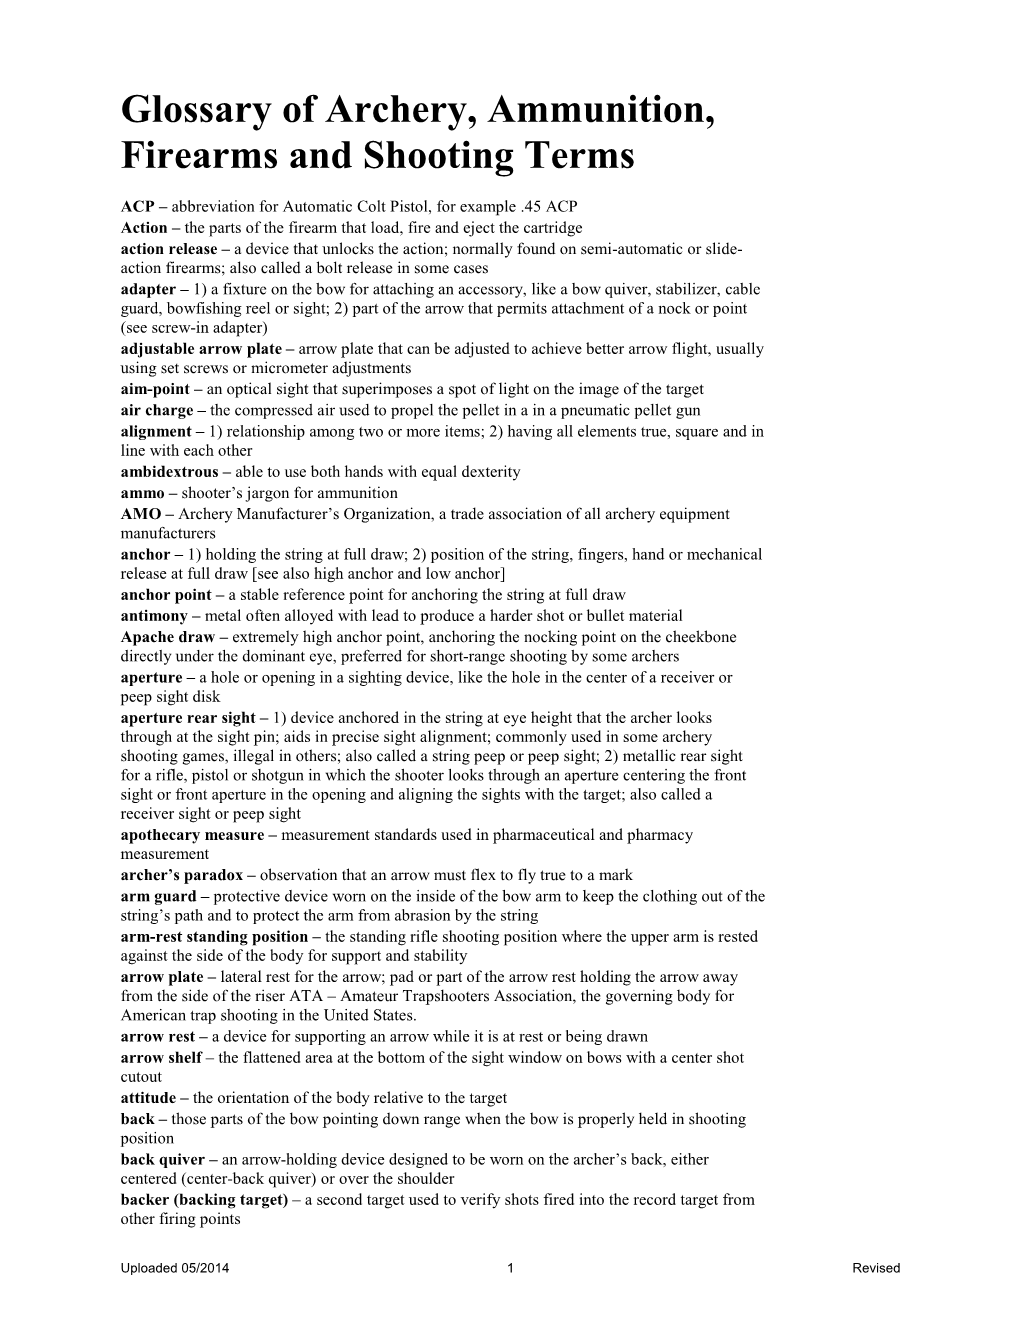 Glossary of Archery, Ammunition, Firearms and Shooting Terms